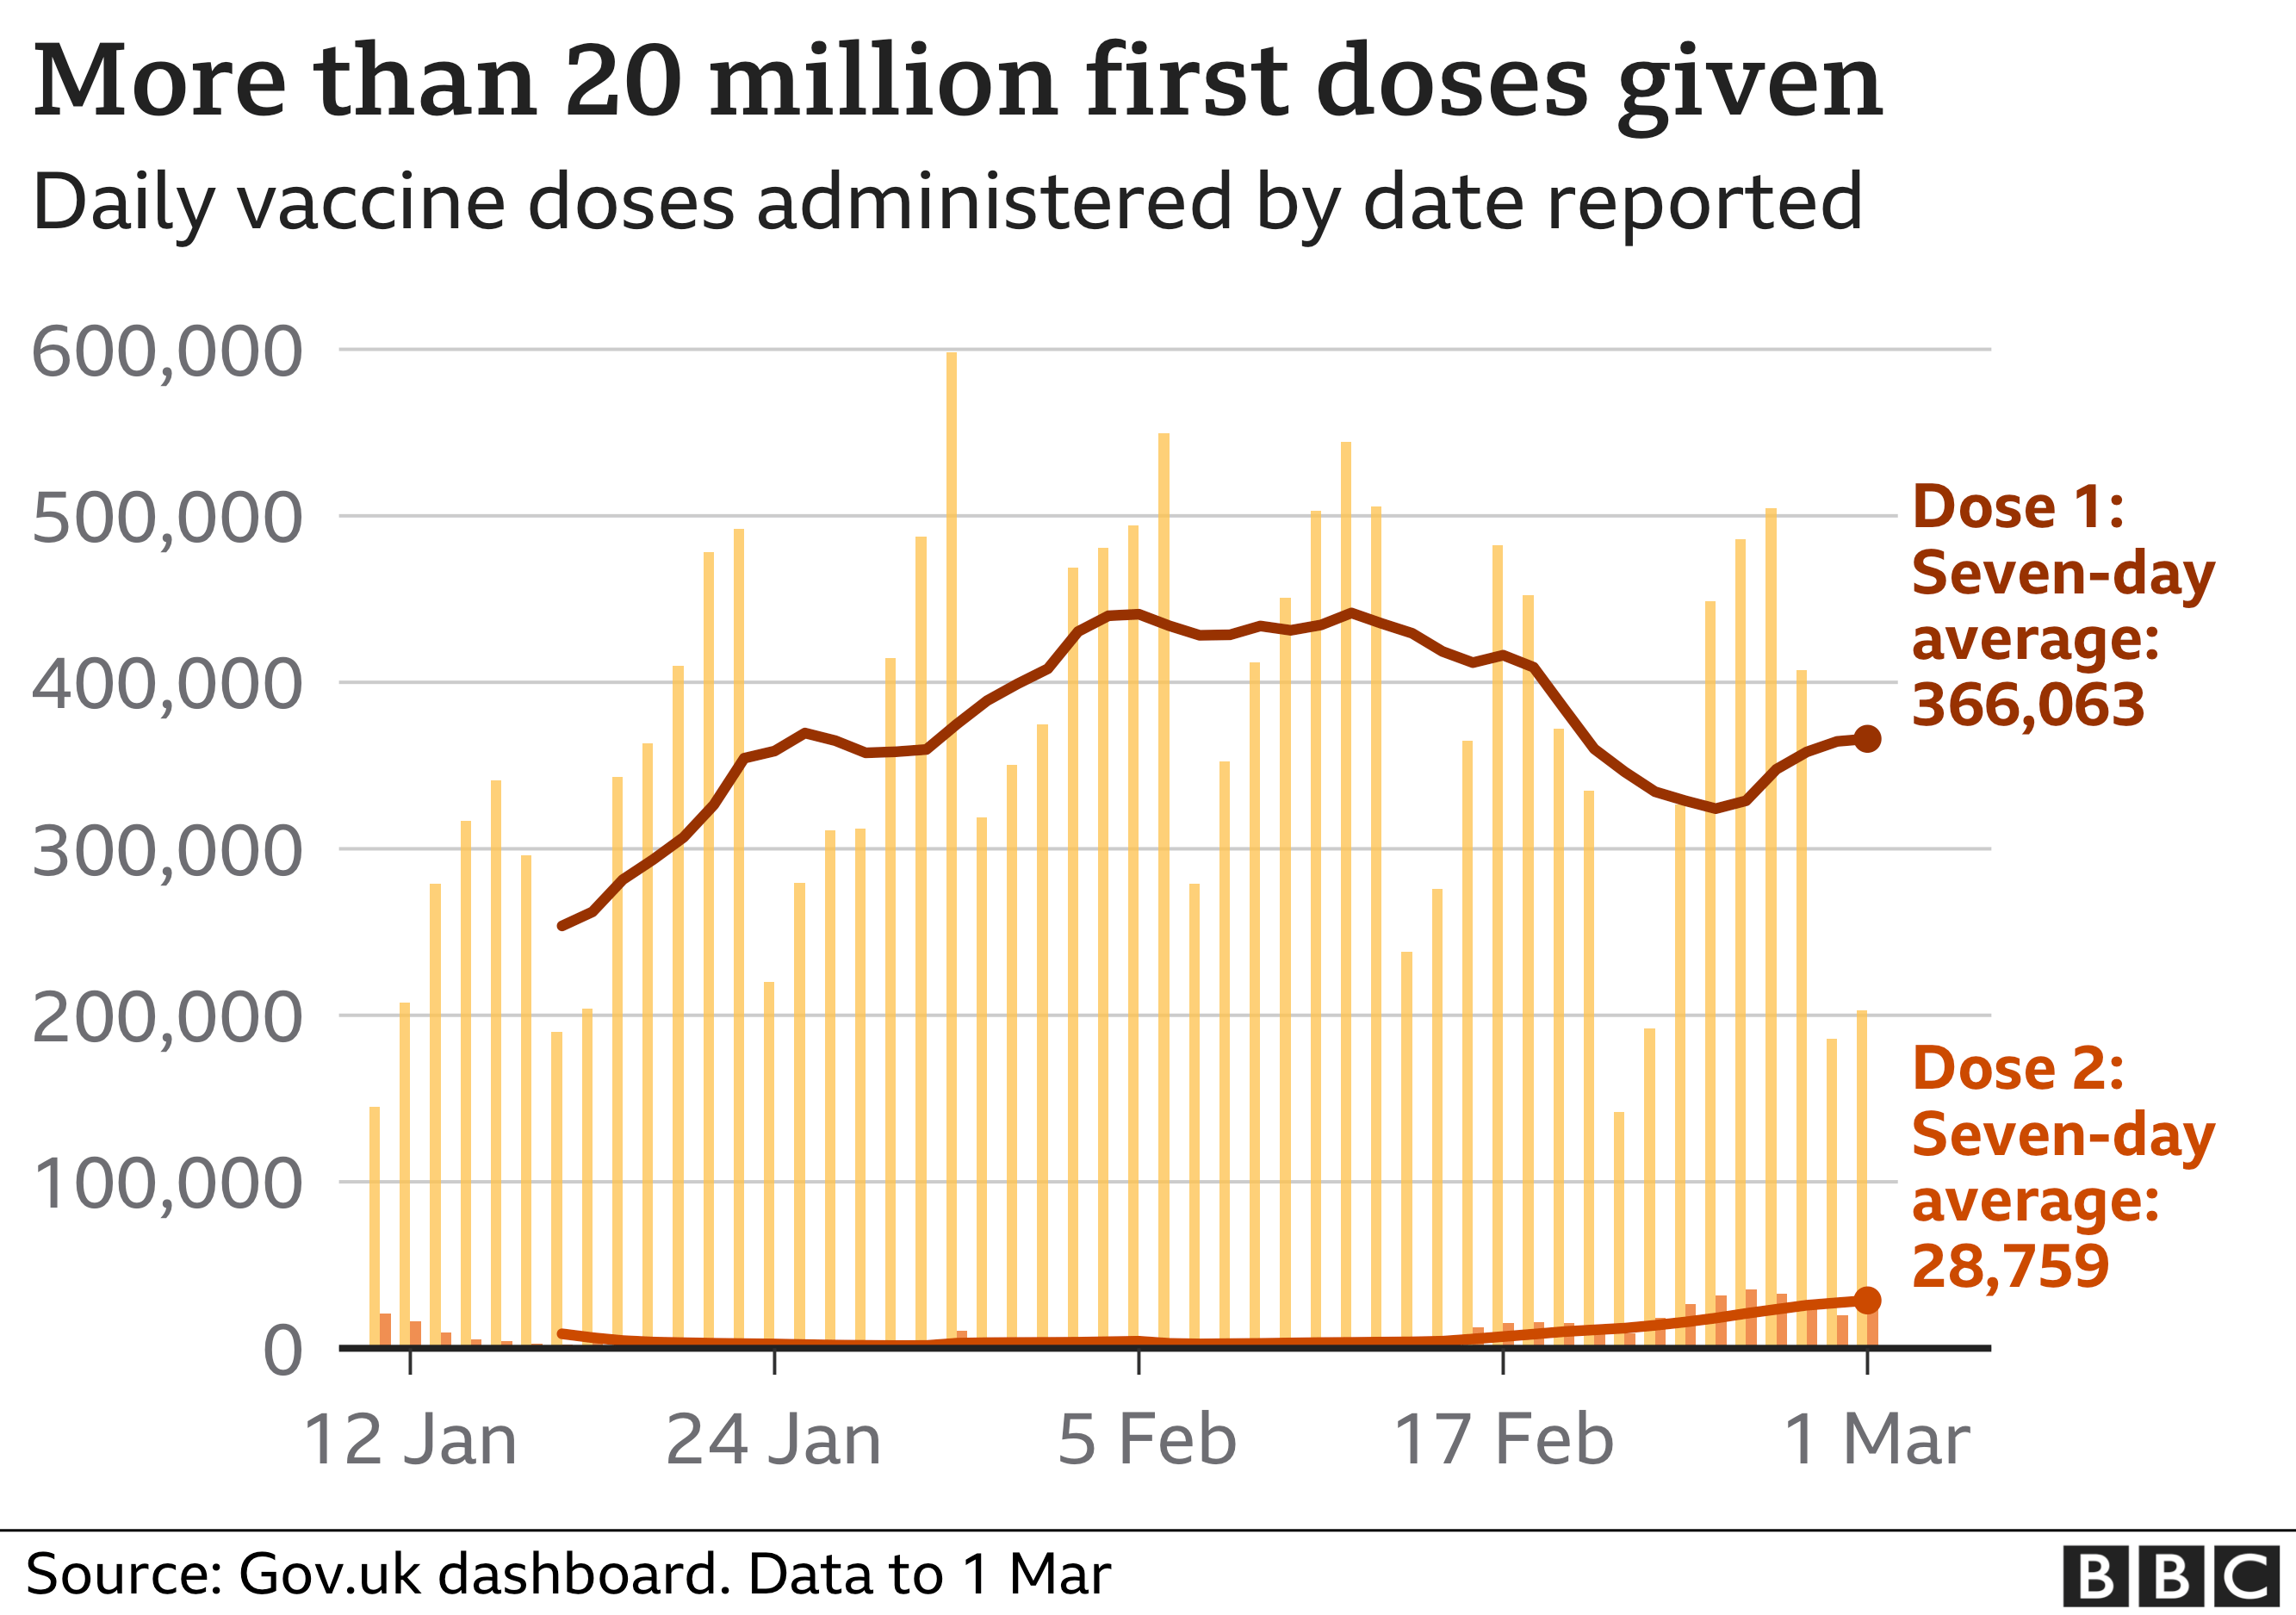 Graph showing the number of daily vaccine doses administered in the UK by date reported